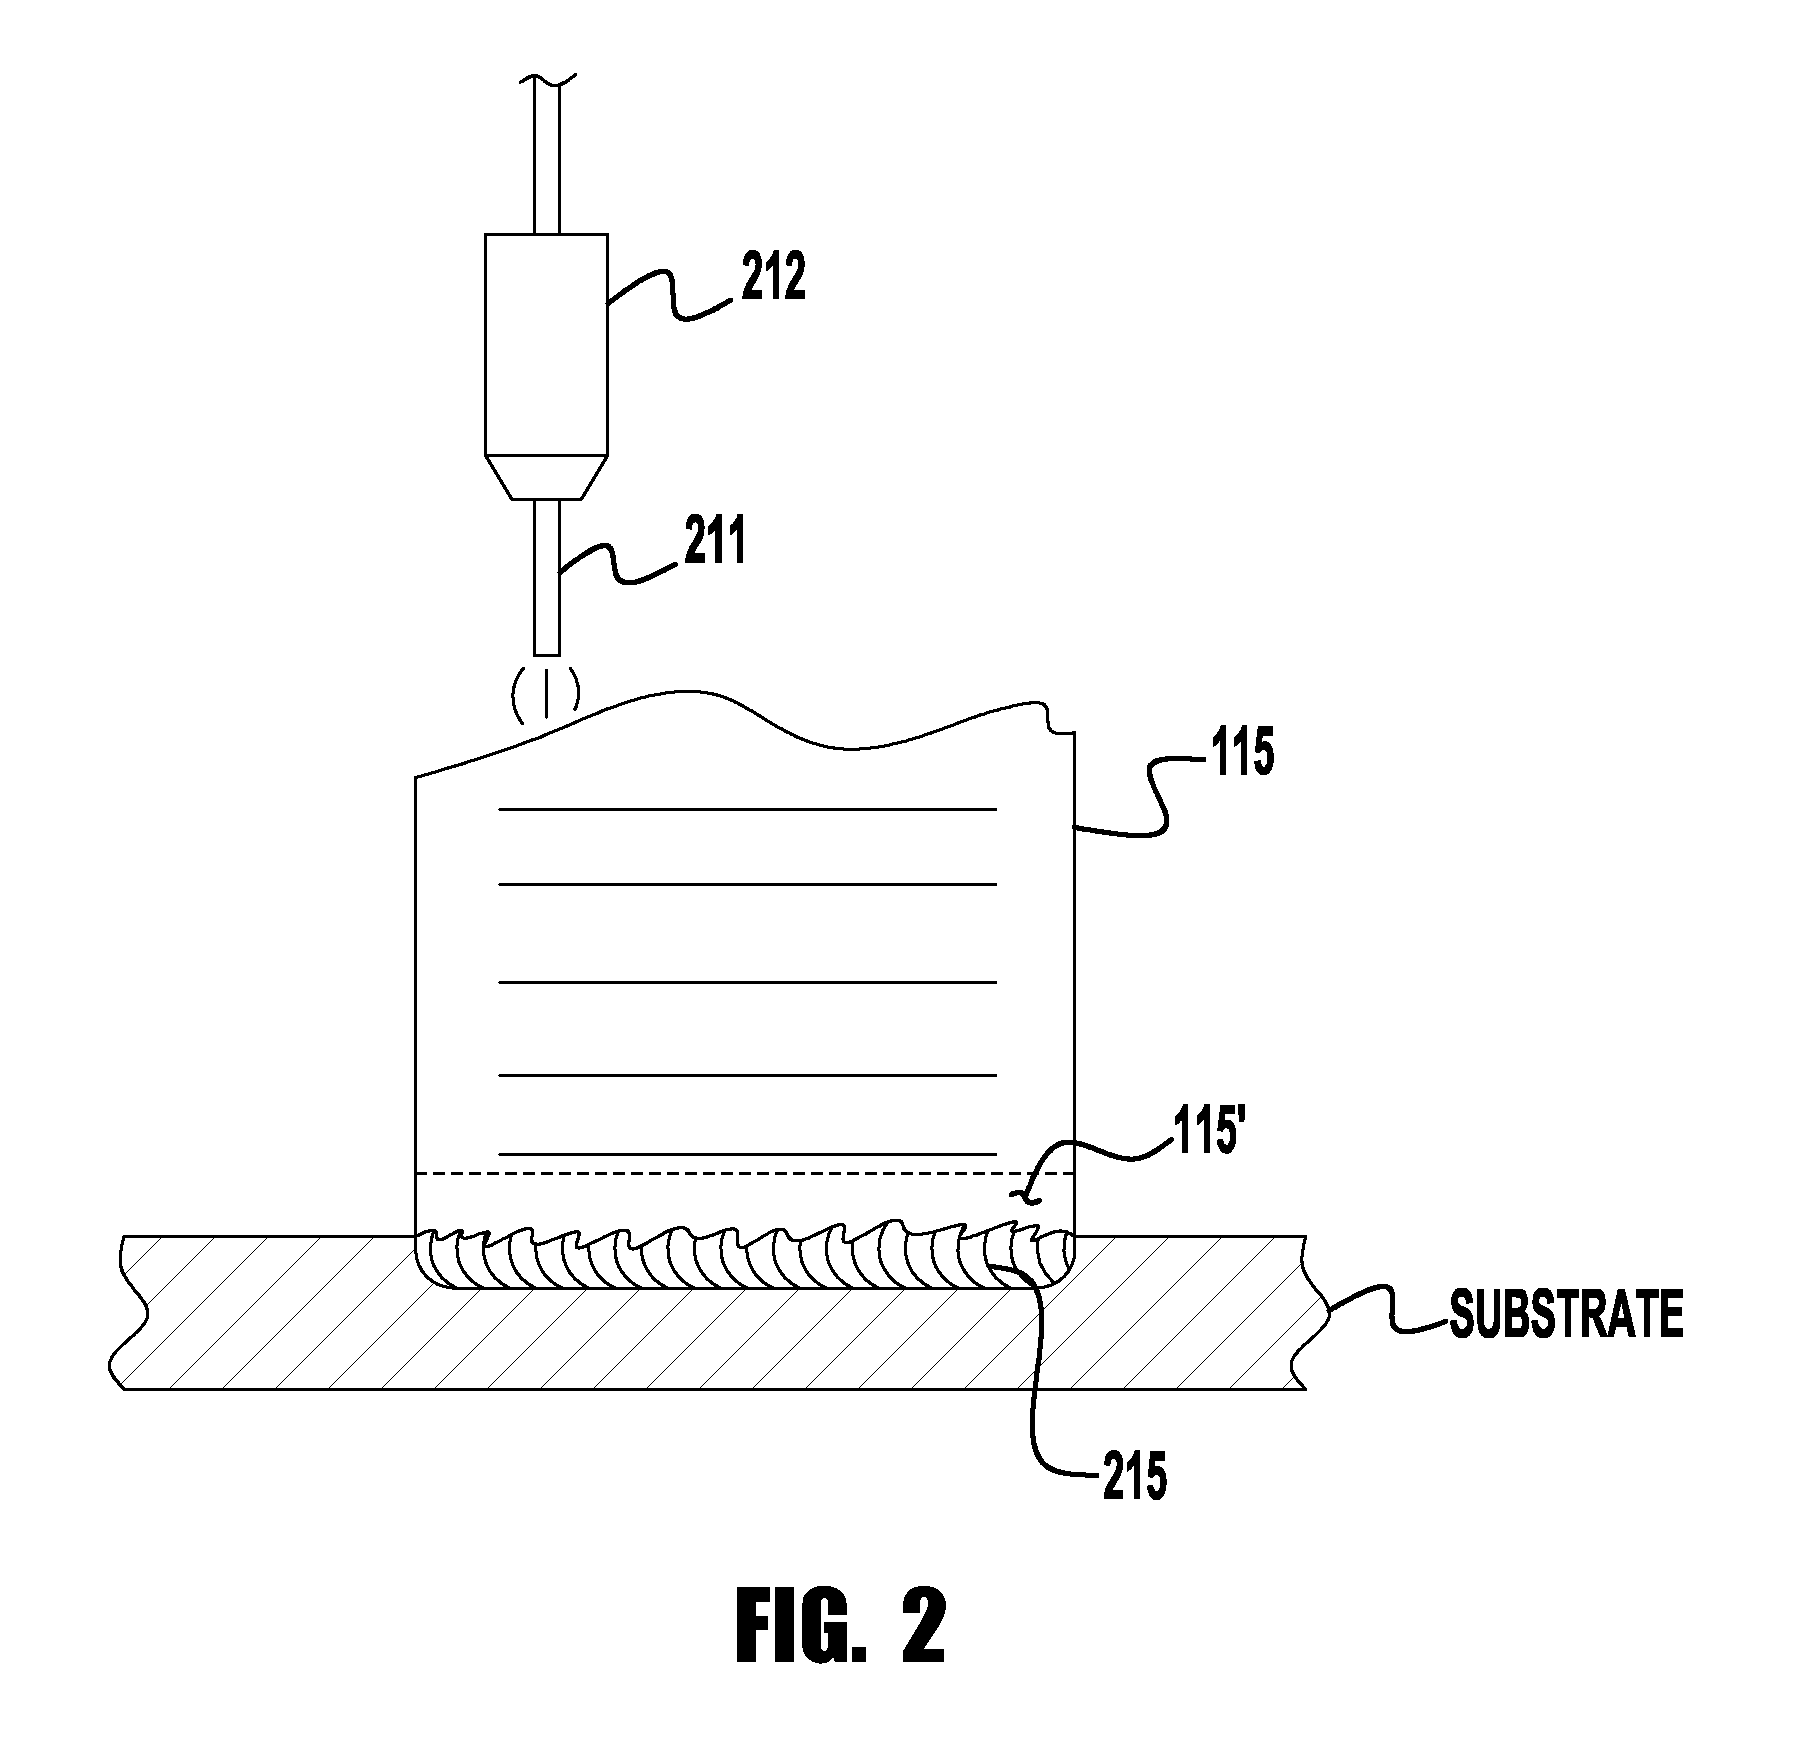 System and method of controlling attachment and release of additive manufacturing builds using a welding process